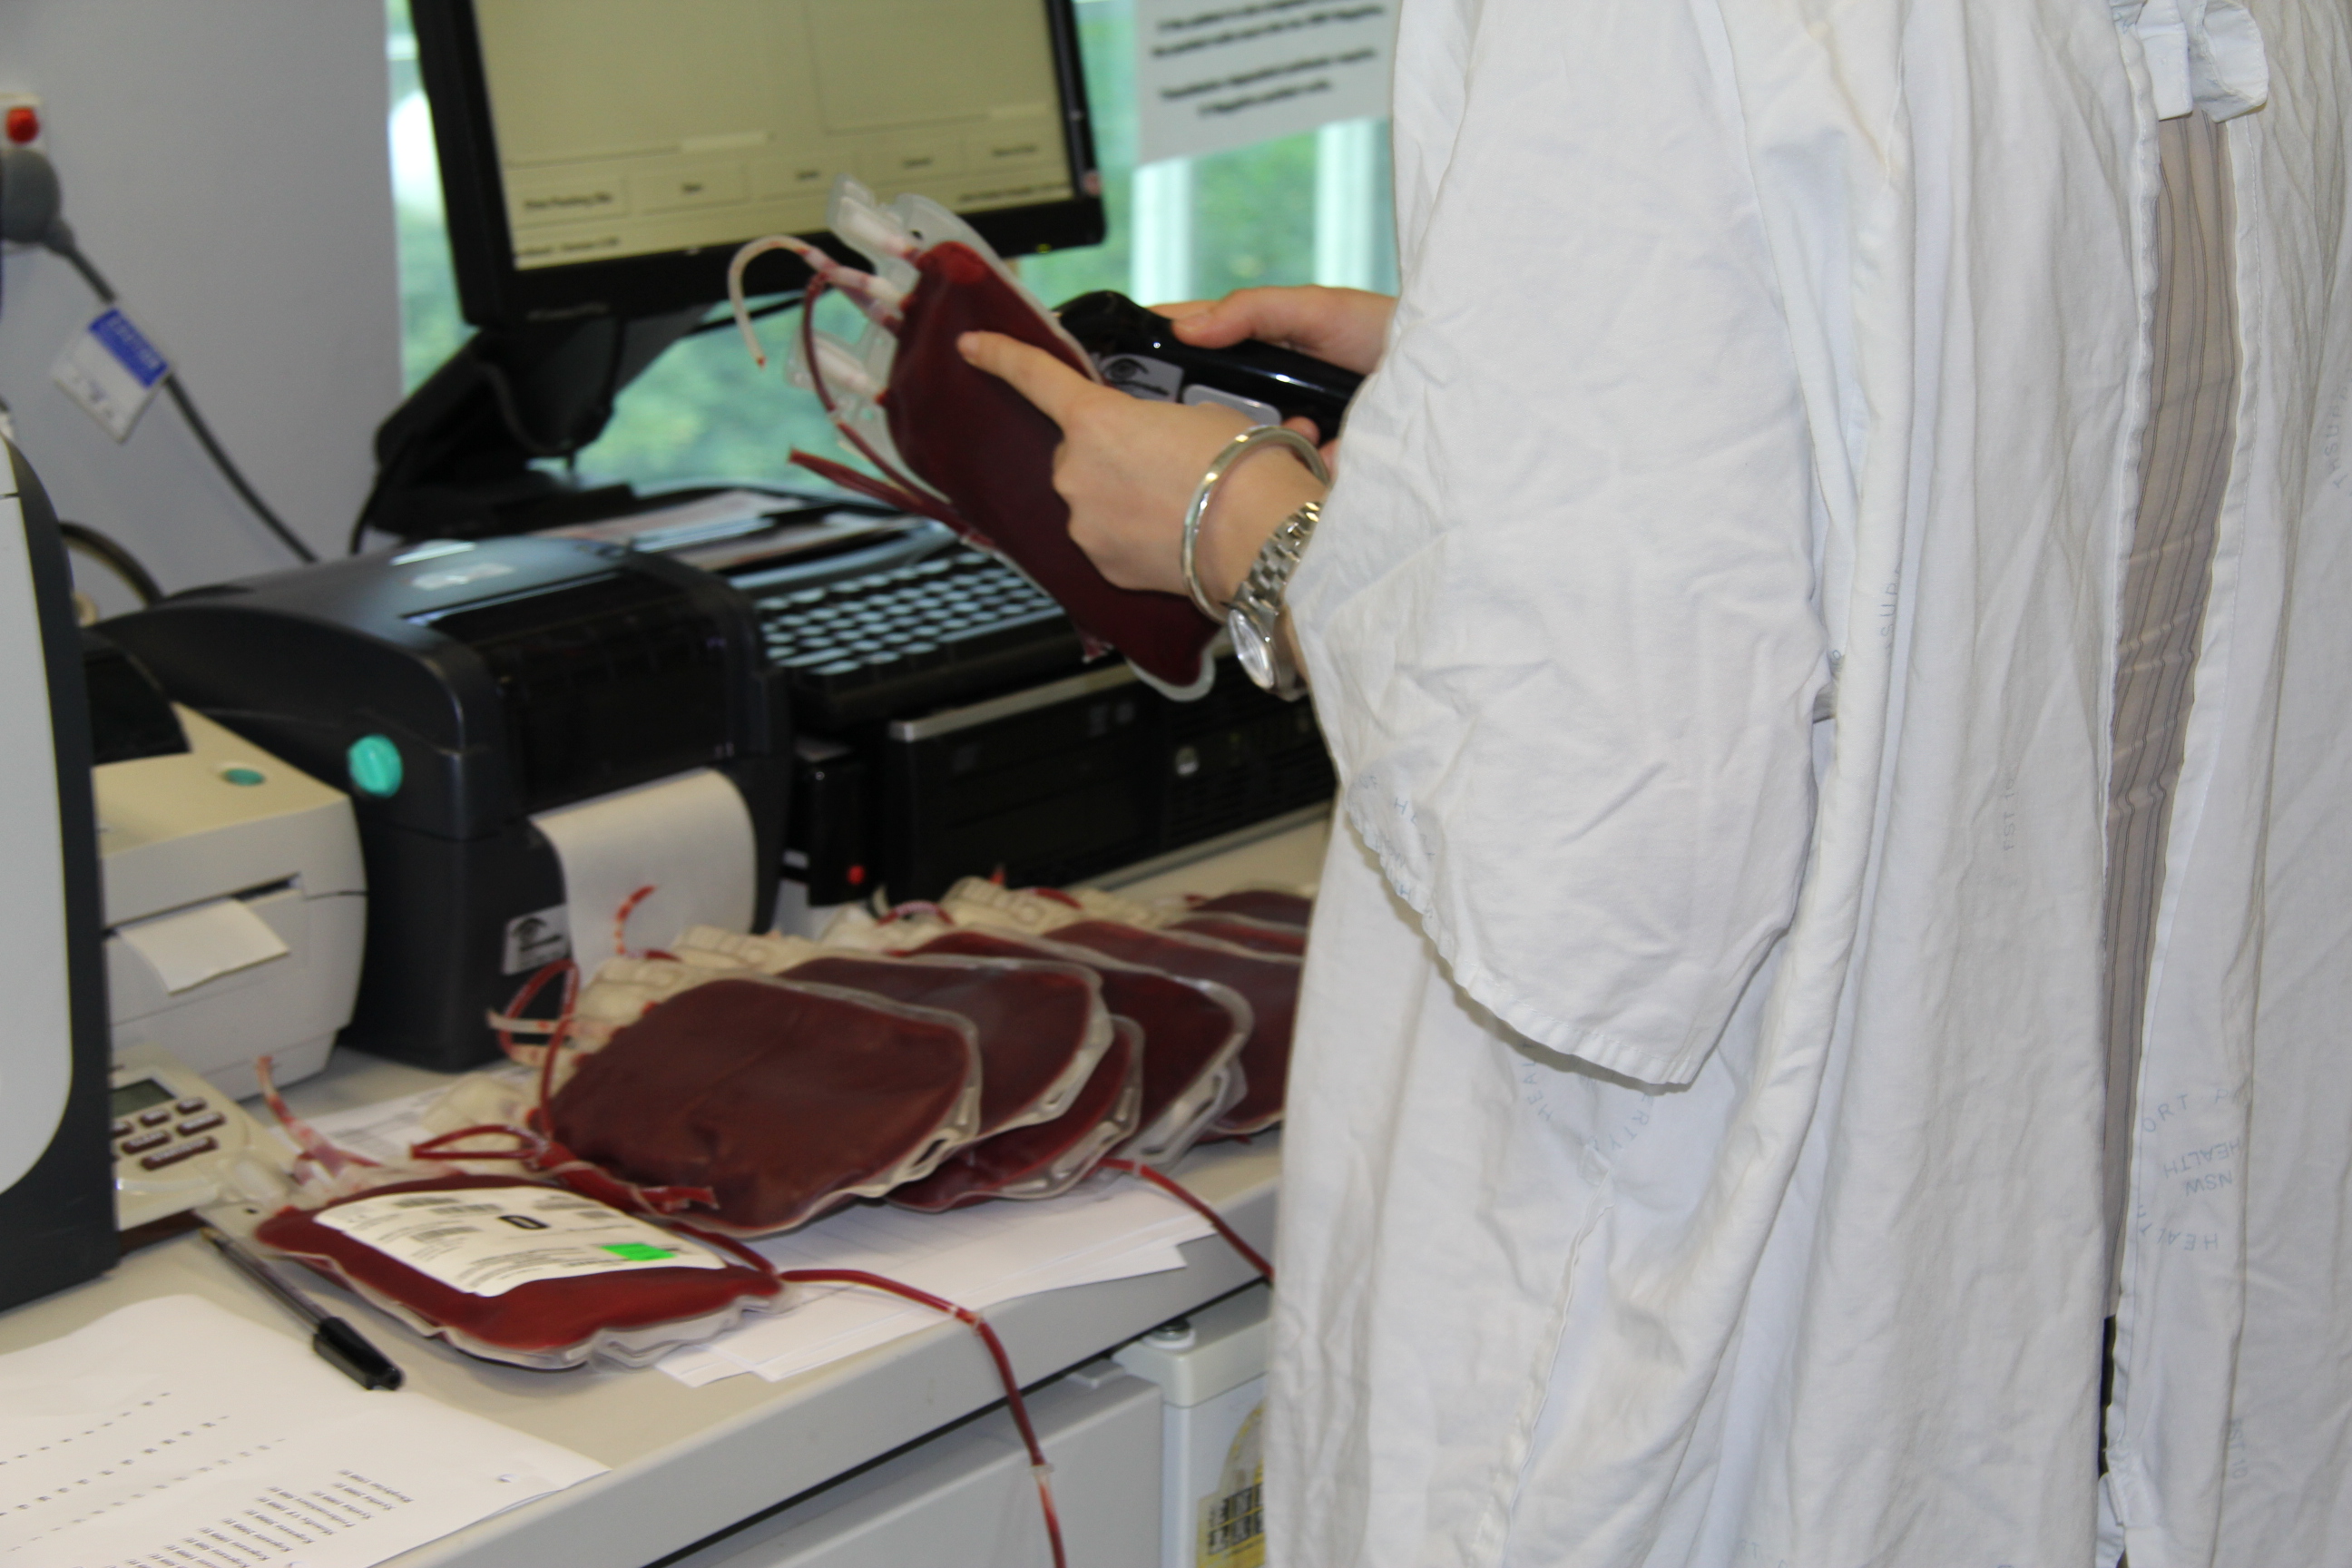 Scanning of blood bags